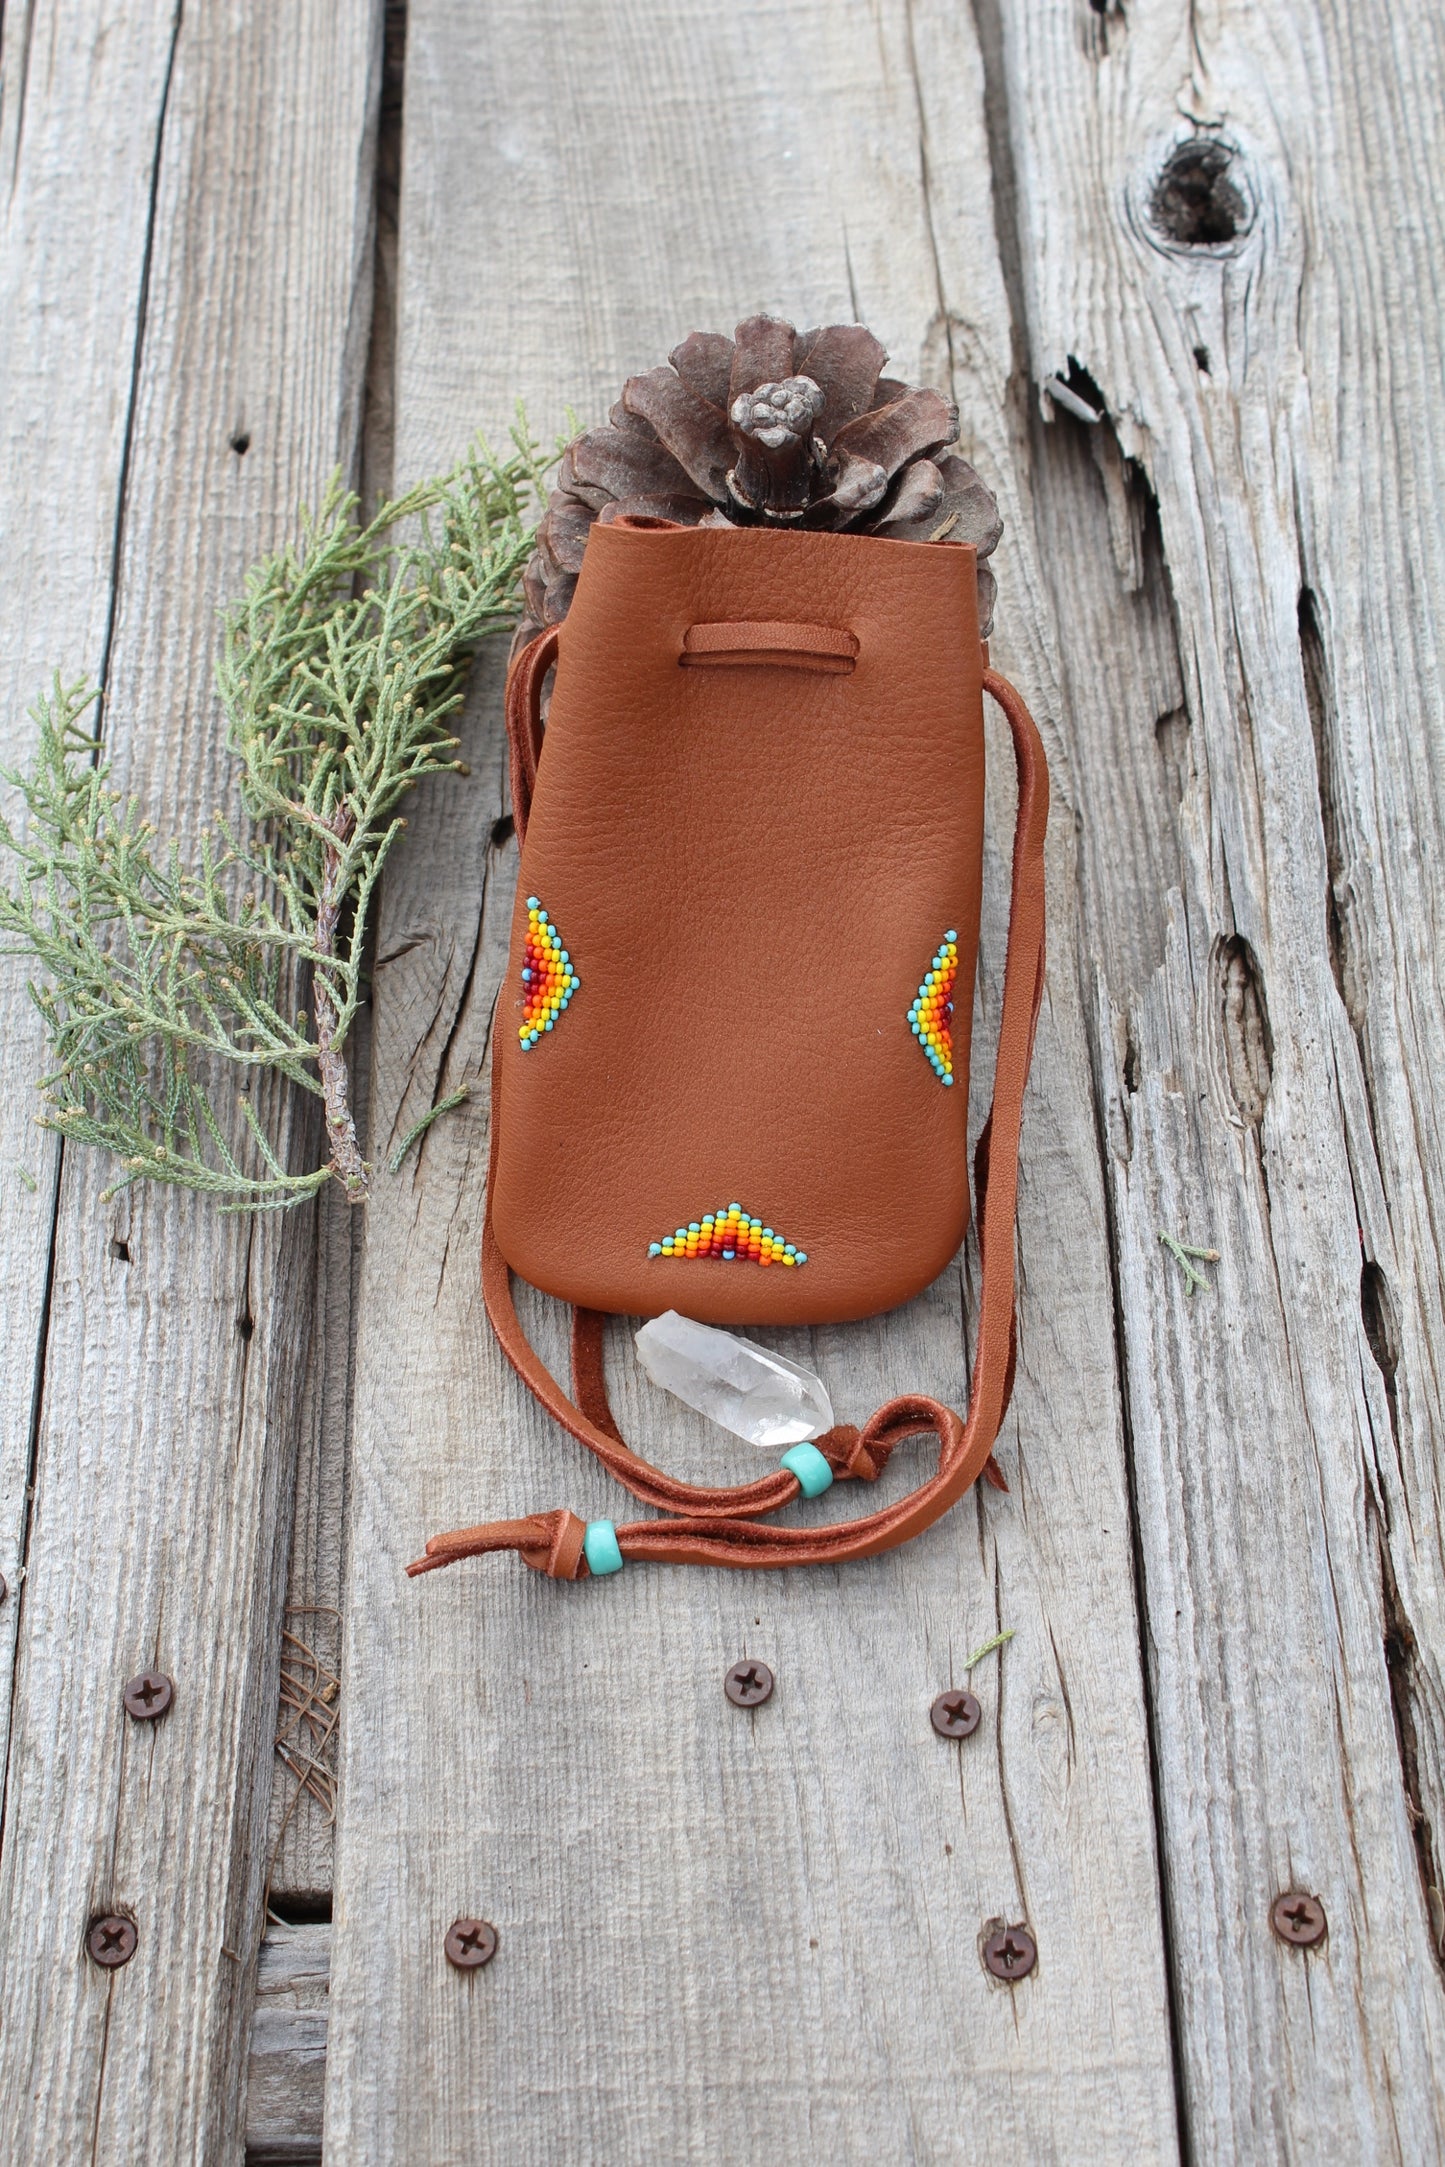 Leather medicine bag, beaded drawstring pouch